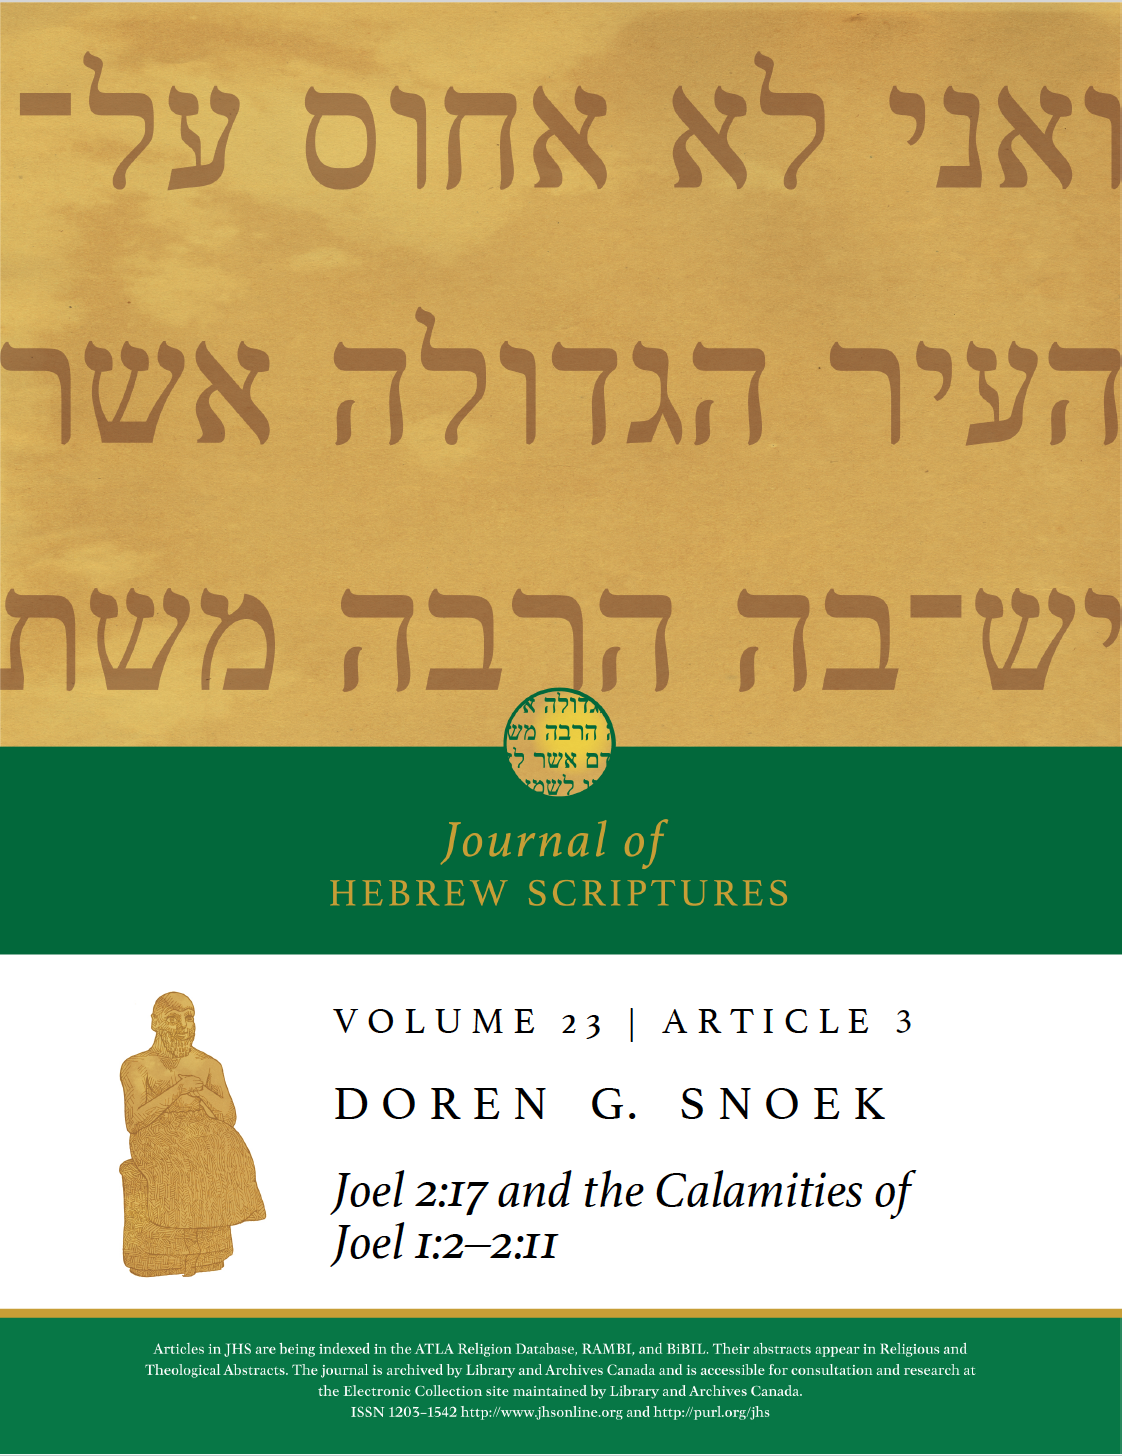 JHS, Volume 23, Article 3, Cover Page